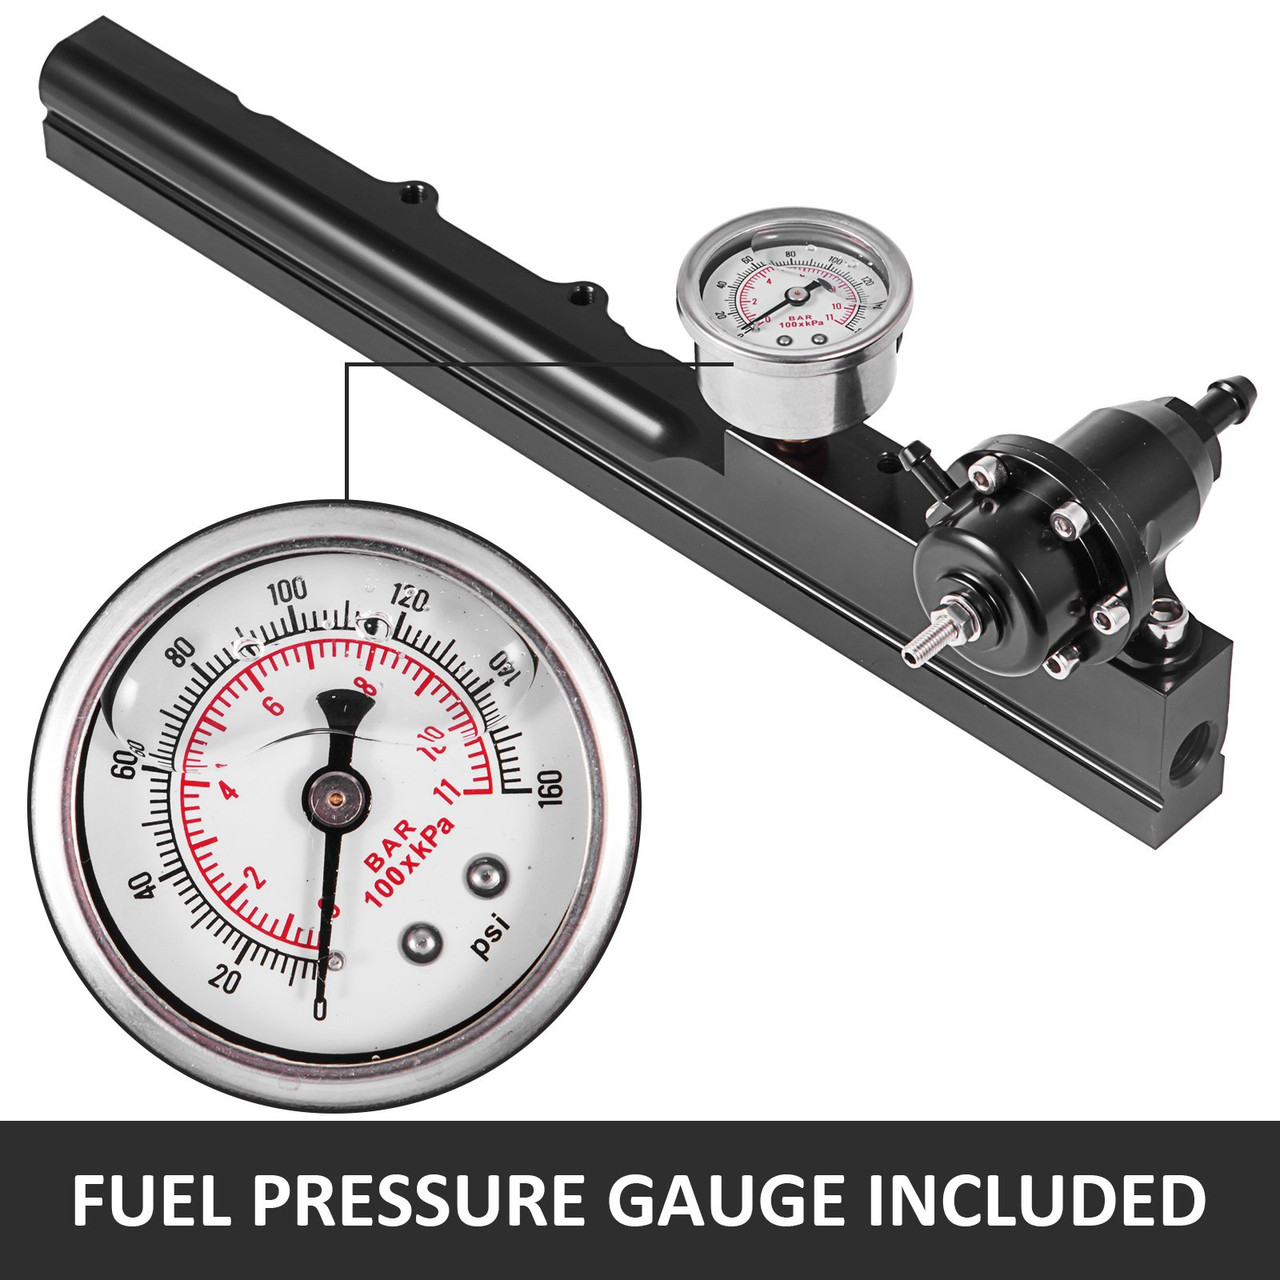 1/2" Fuel Bore Size Fuel Rail Kit 1/8th NPT B-Series Swapped Engines With Fuel Pressure Regulator Gauge 6AN Fitting for Fuel Rail-To-Fuel Line